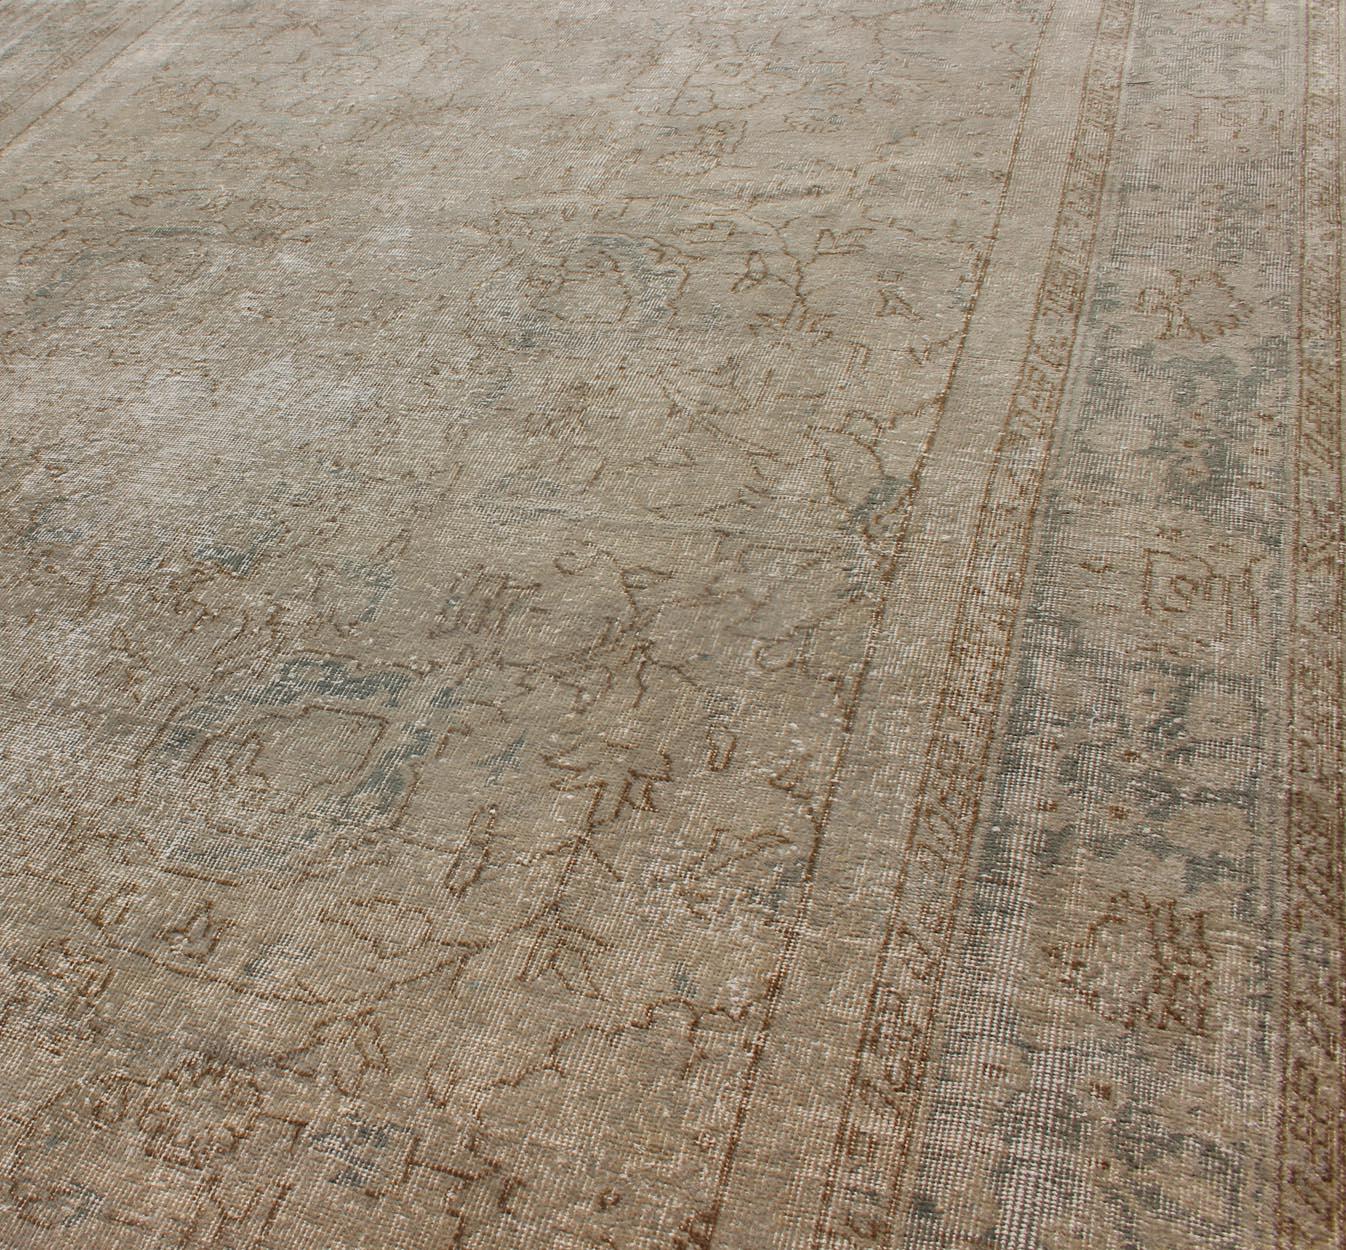 Distressed Turkish Carpet with Floral Design in Taupe, Gray, Brown and Cream 1